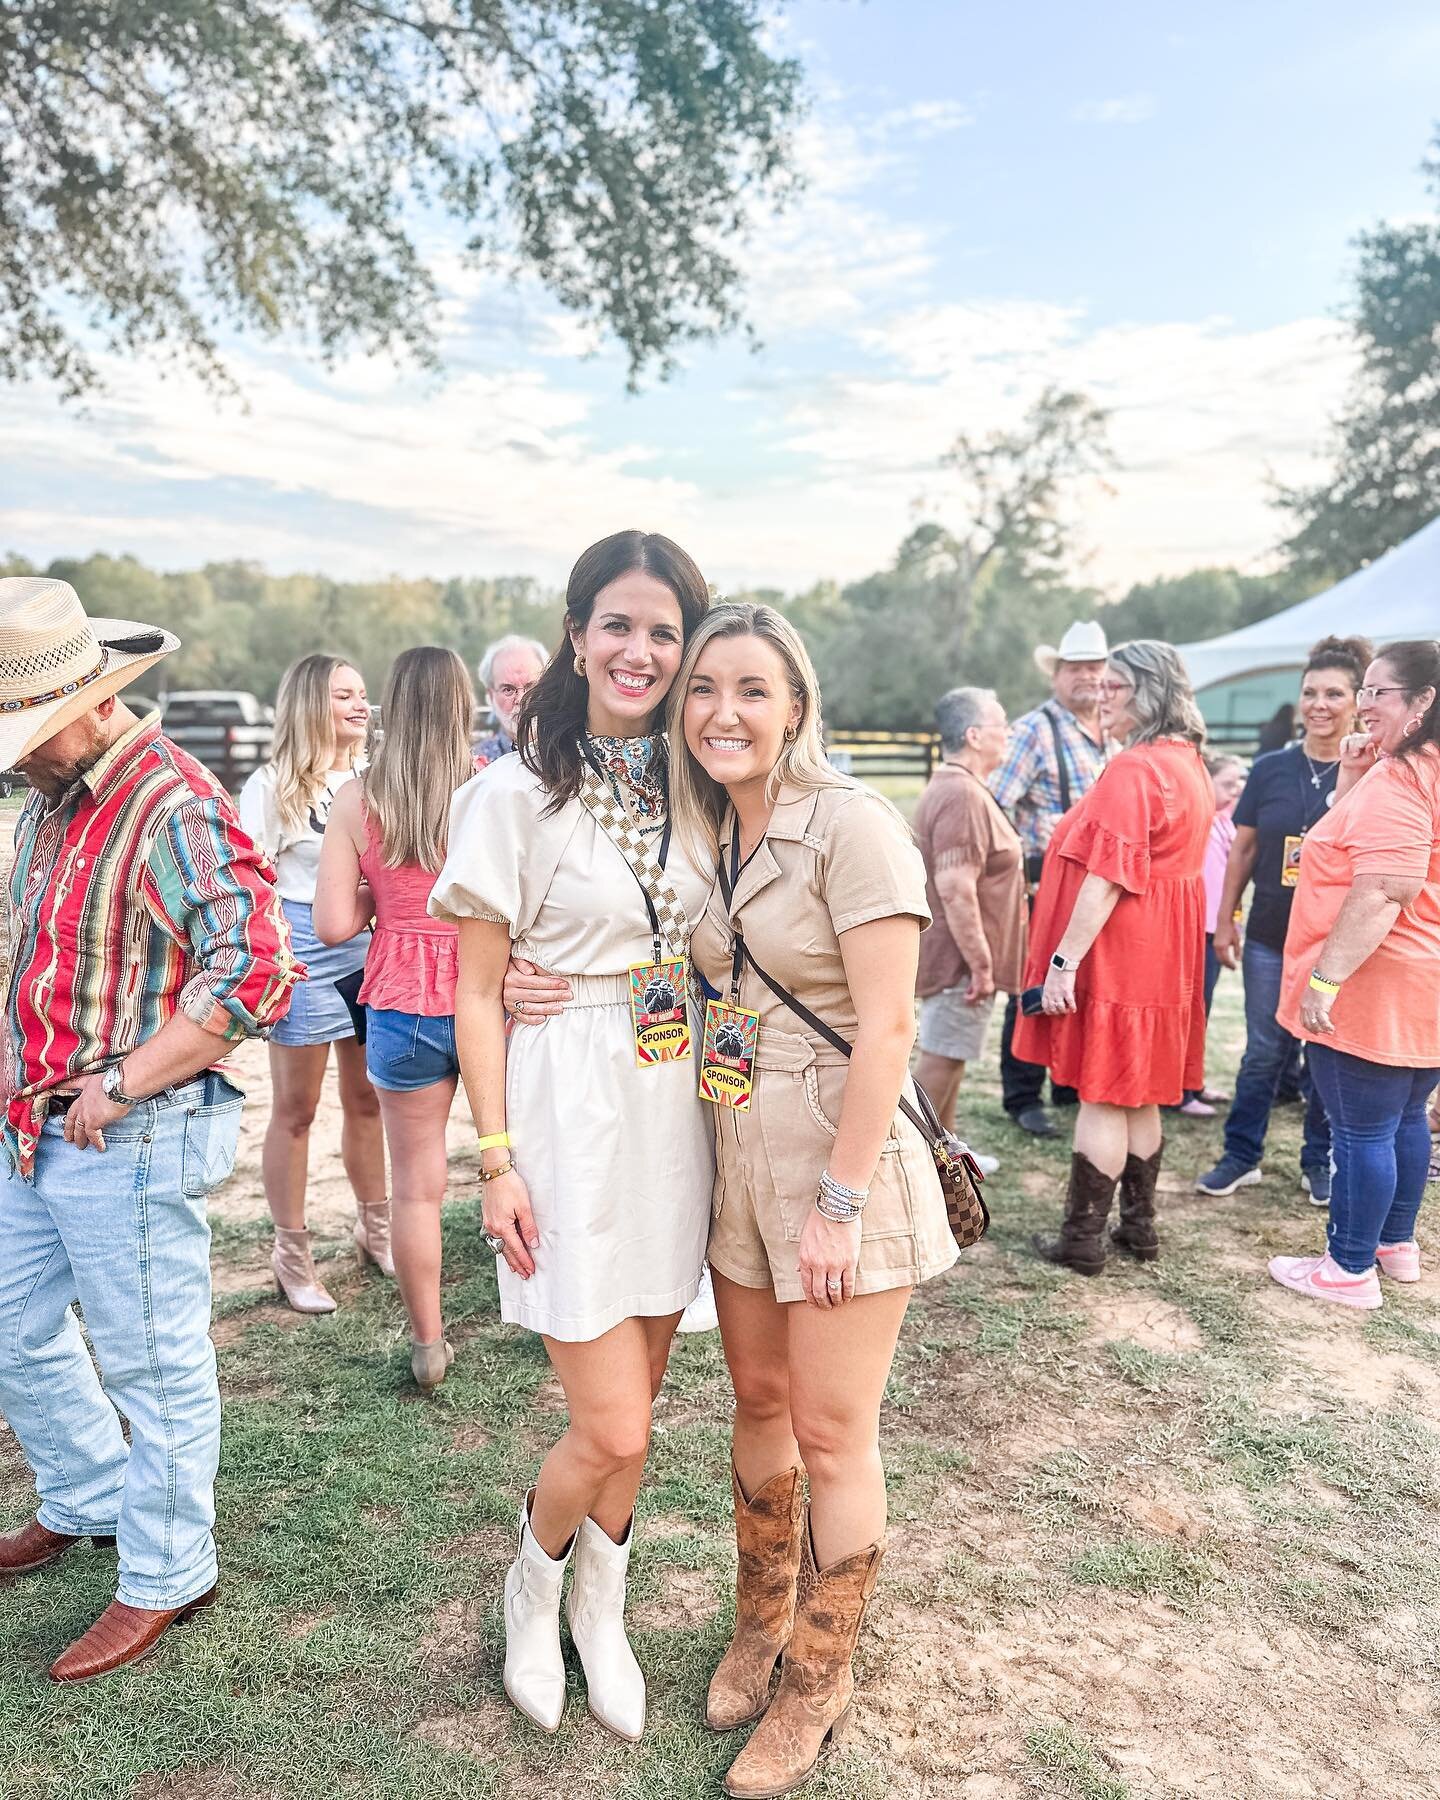 Bright Creative was proud to sponsor the 5th annual Pasture Party with Pat Green benefitting our beloved client, @hannah_house_maternity_home! 🎸 

At Hannah House, their mission is to change the life of a mother, save the life of a child. They&rsquo